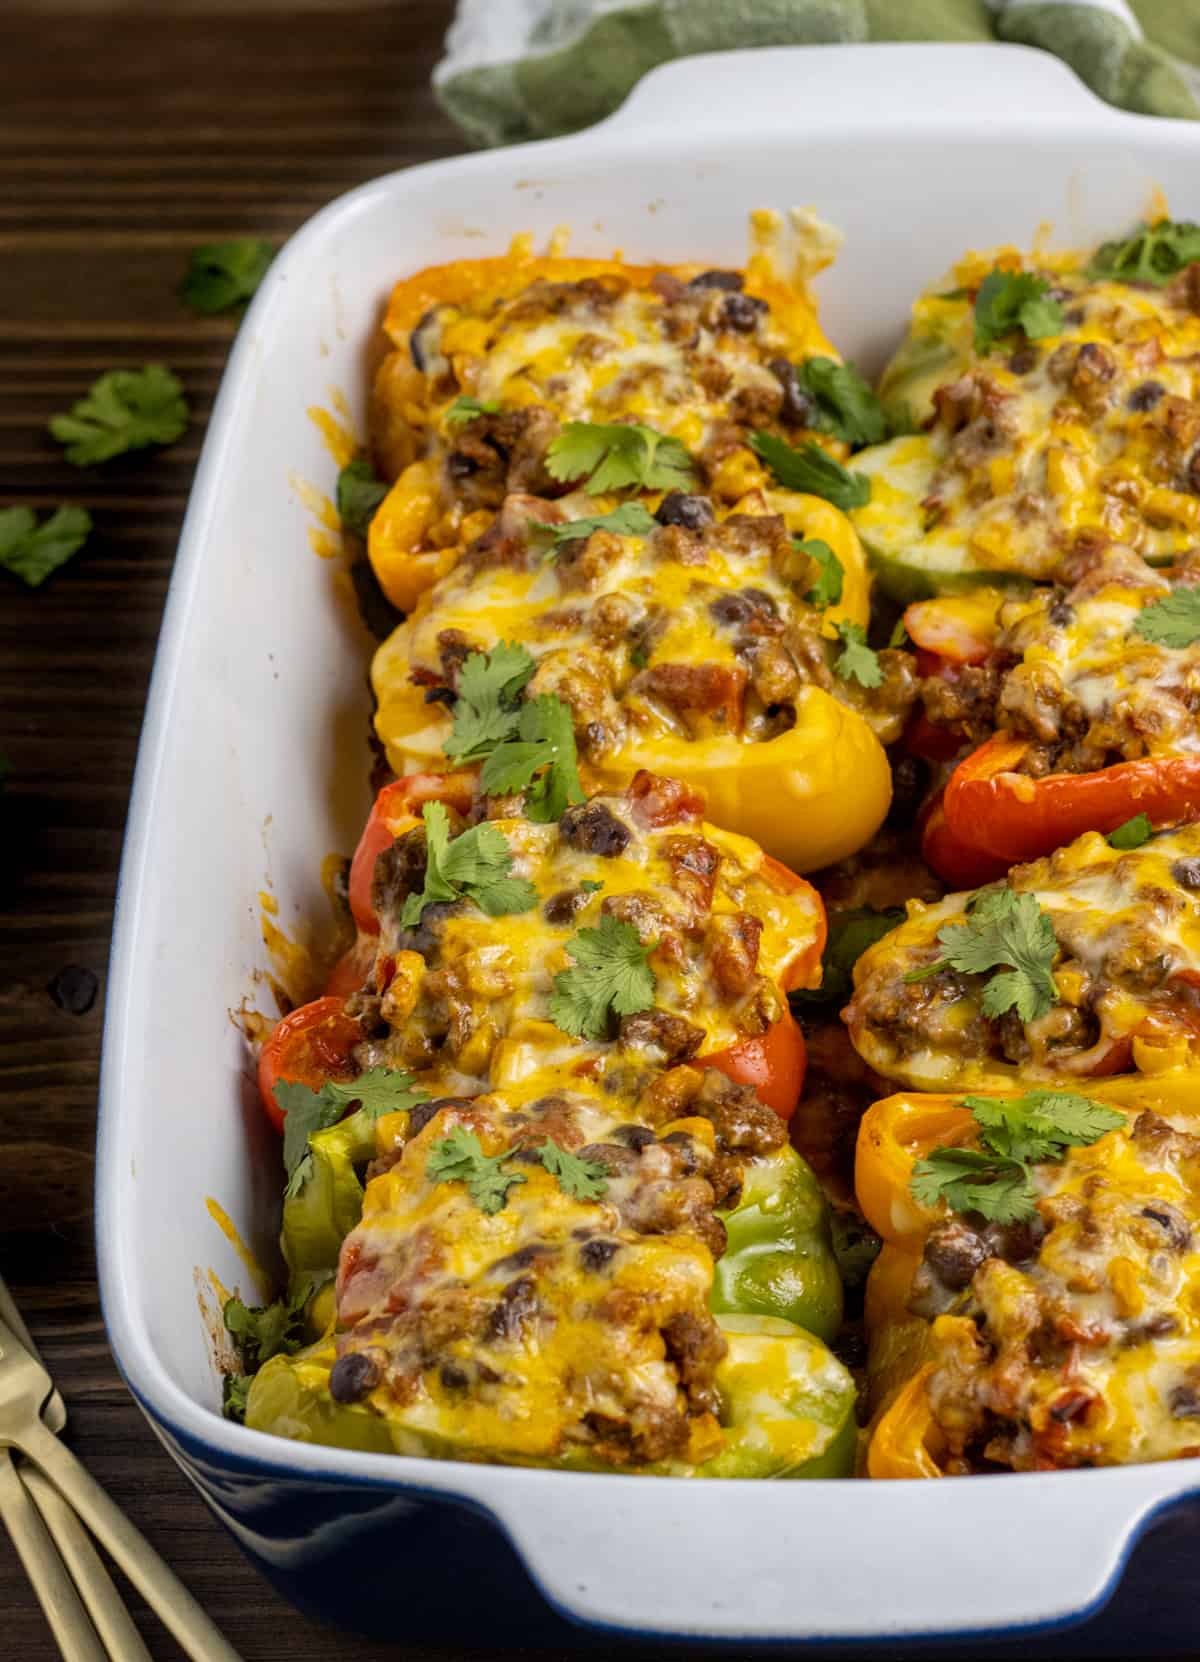 Taco stuffed peppers in a baking dish with forks on the side.